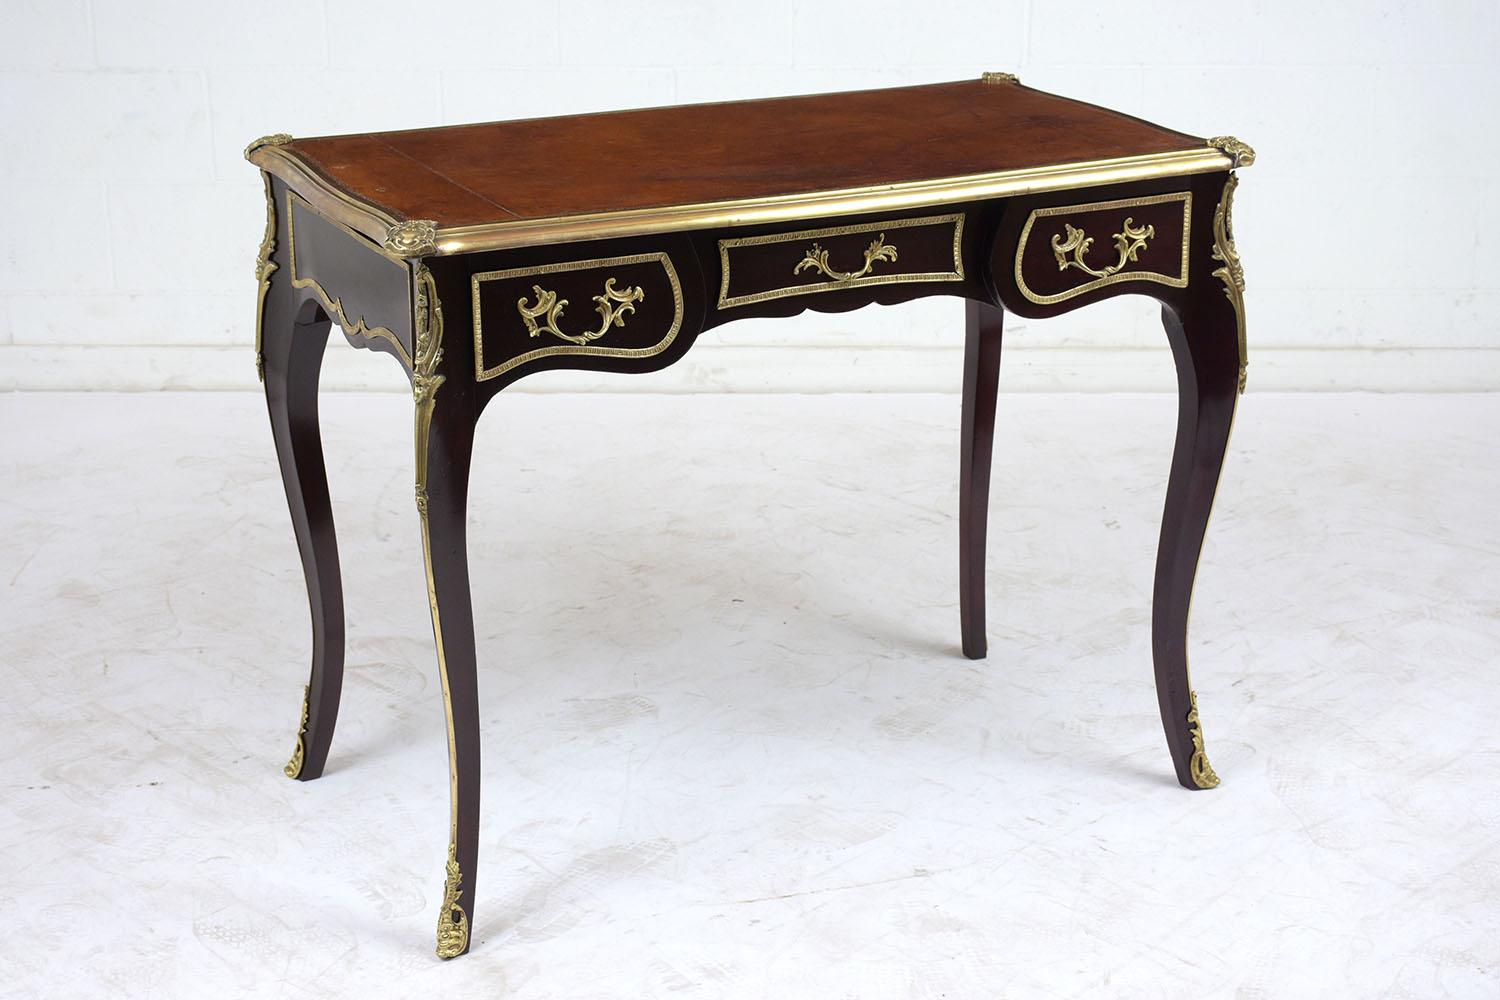 This 1900s Louis XV-style desk is made of mahogany wood stained a dark mahogany color with a lacquered finish. The top of the desk features embossed leather with original distressed finish, along with a detailed brass molding around the top. There